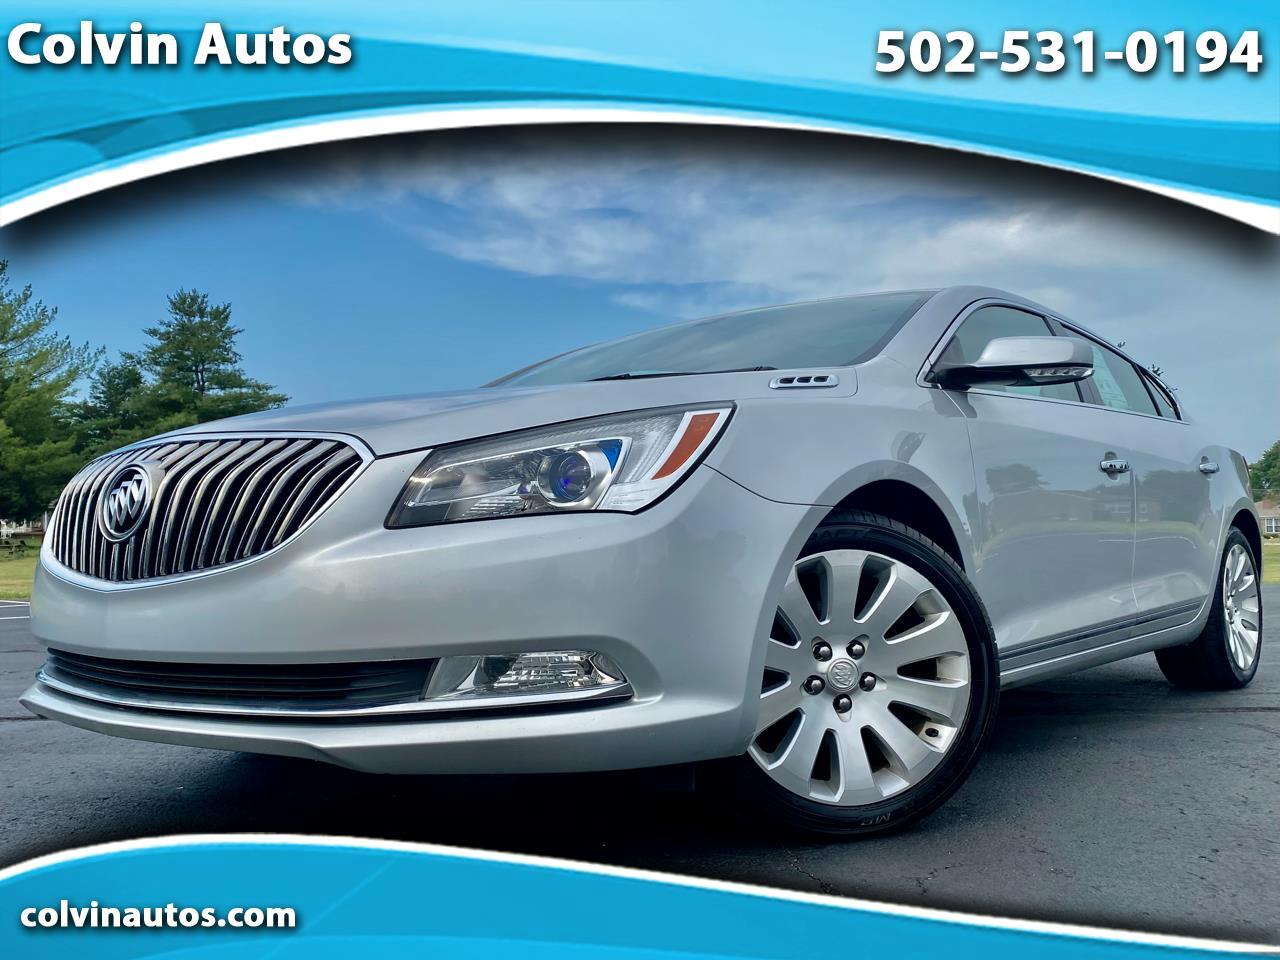 2015 Buick LaCrosse 4dr Sdn Leather AWD